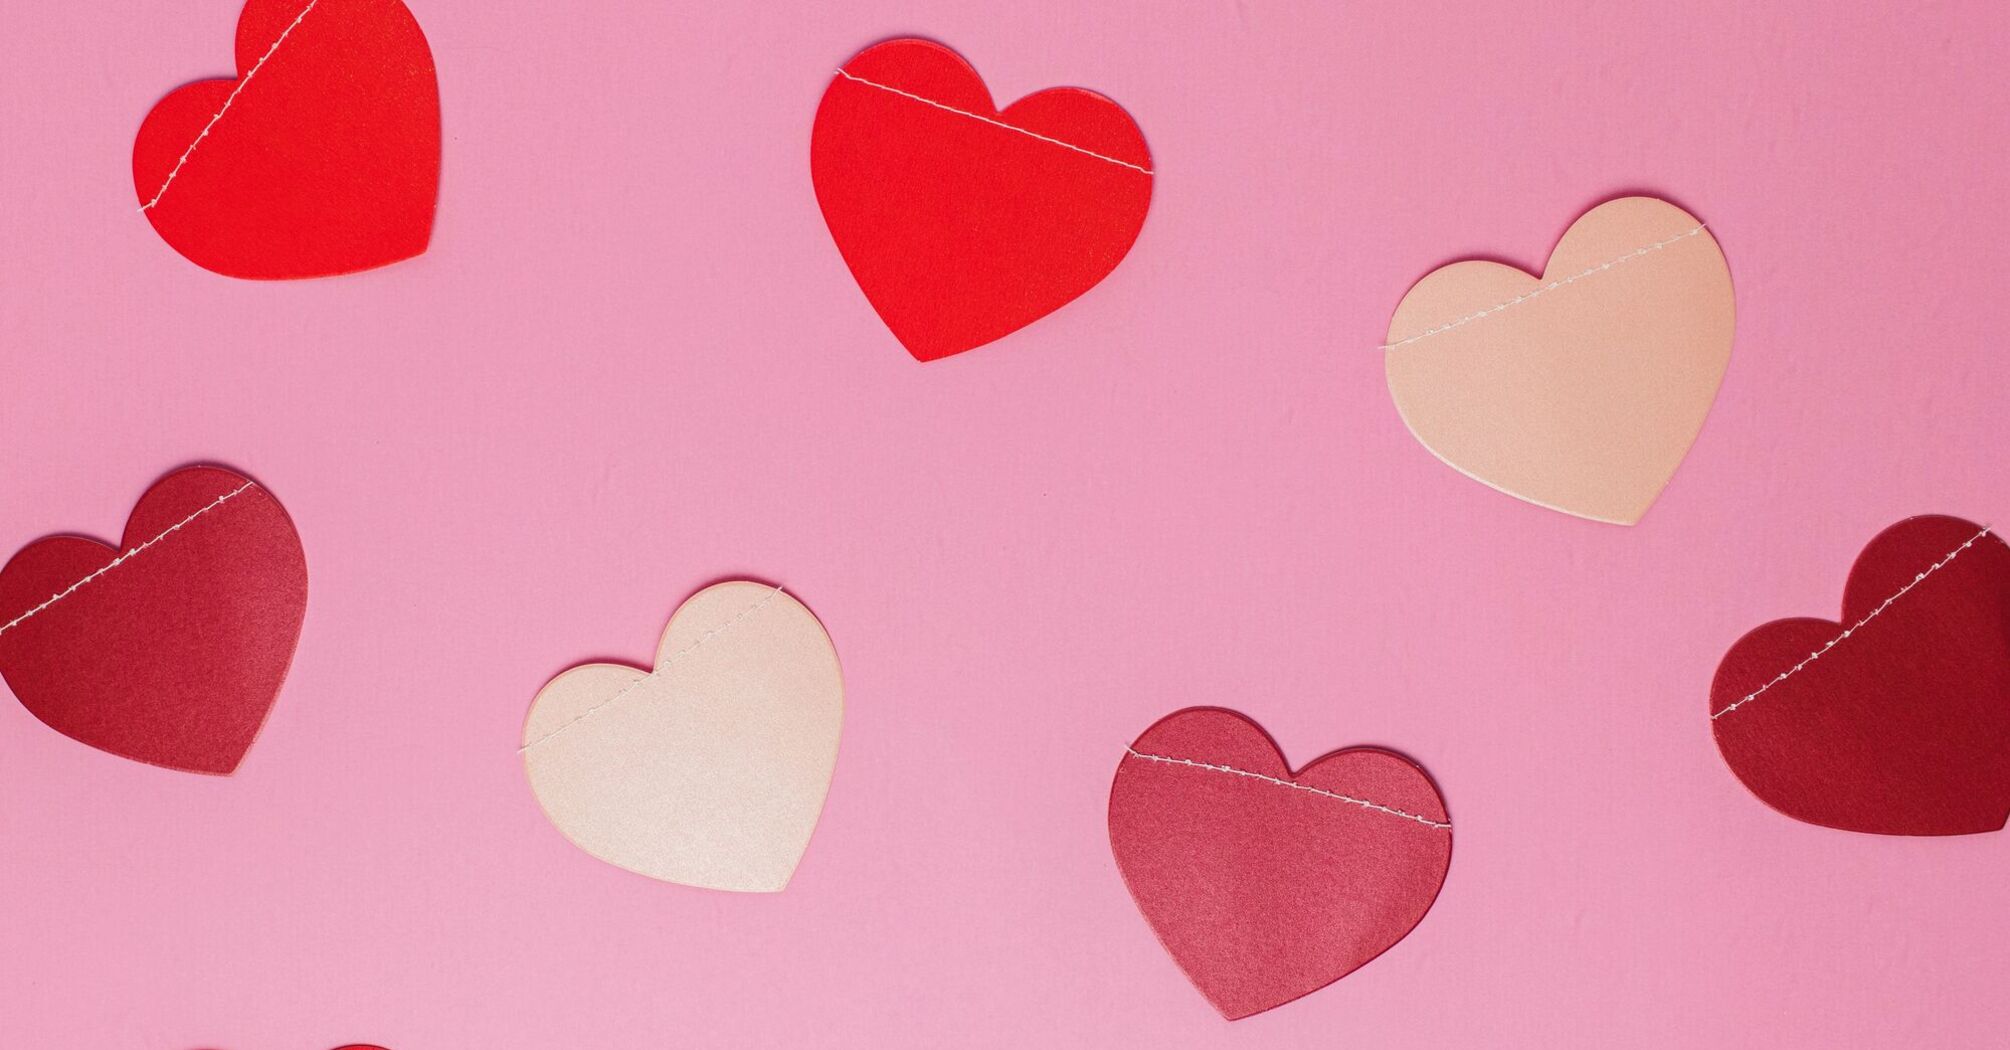 Assorted paper hearts in shades of red and pink scattered on a plain pink background